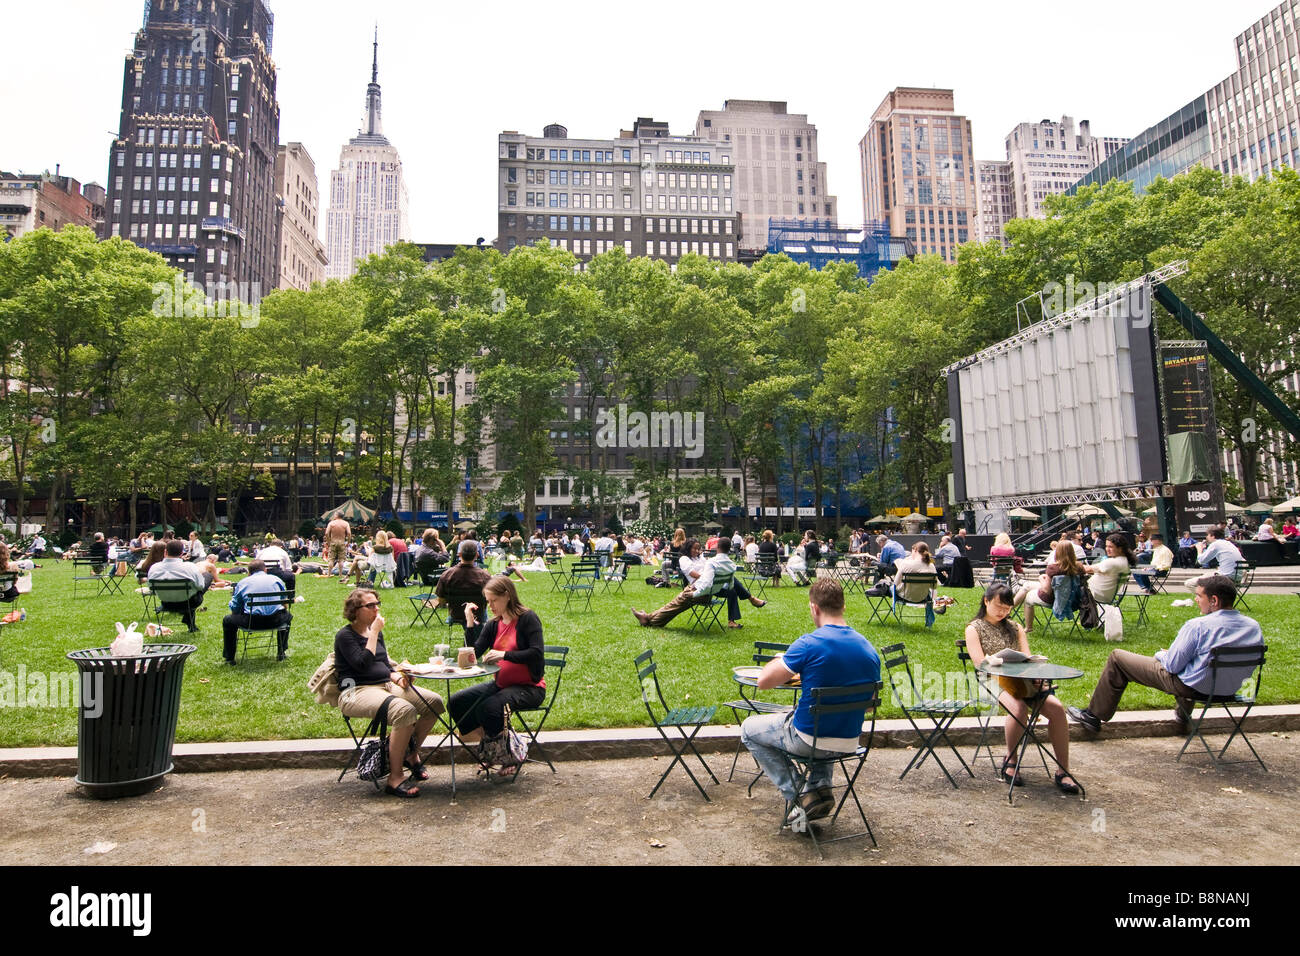 People sitting at small tables trees in a public garden Stock Photo